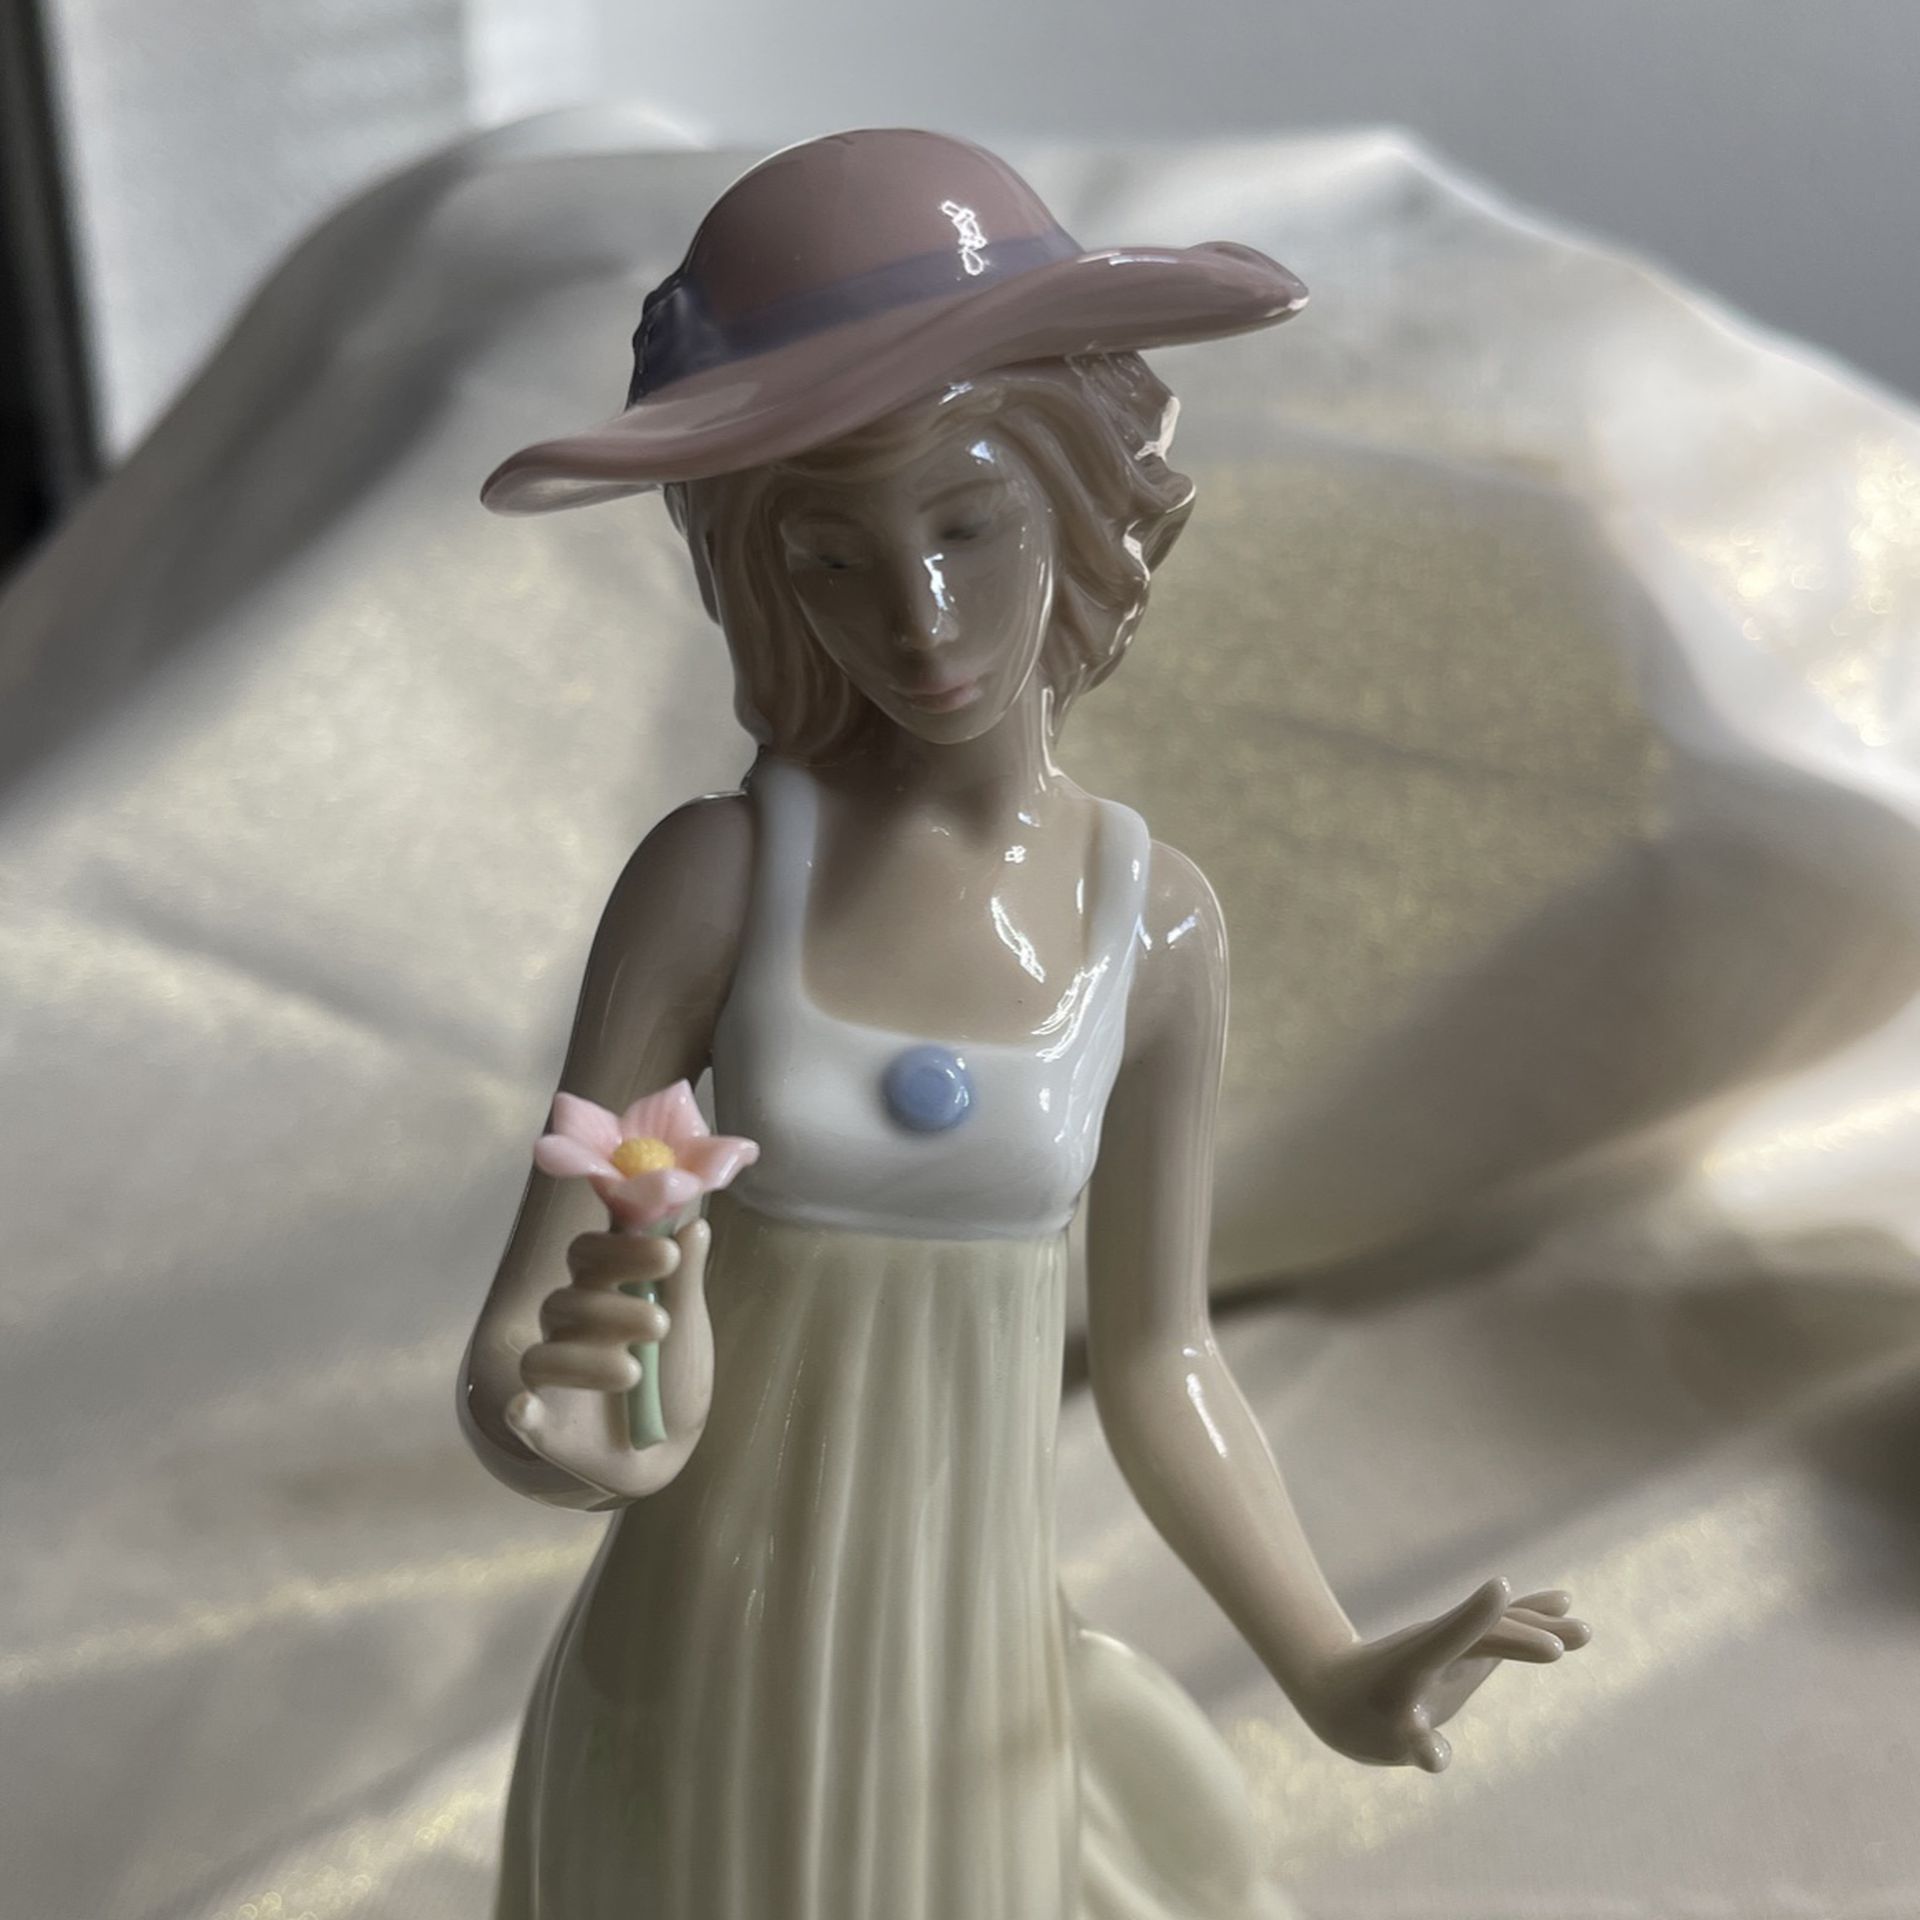 Nao Lladro 1158 “Lady In Yellow Dress Flower”